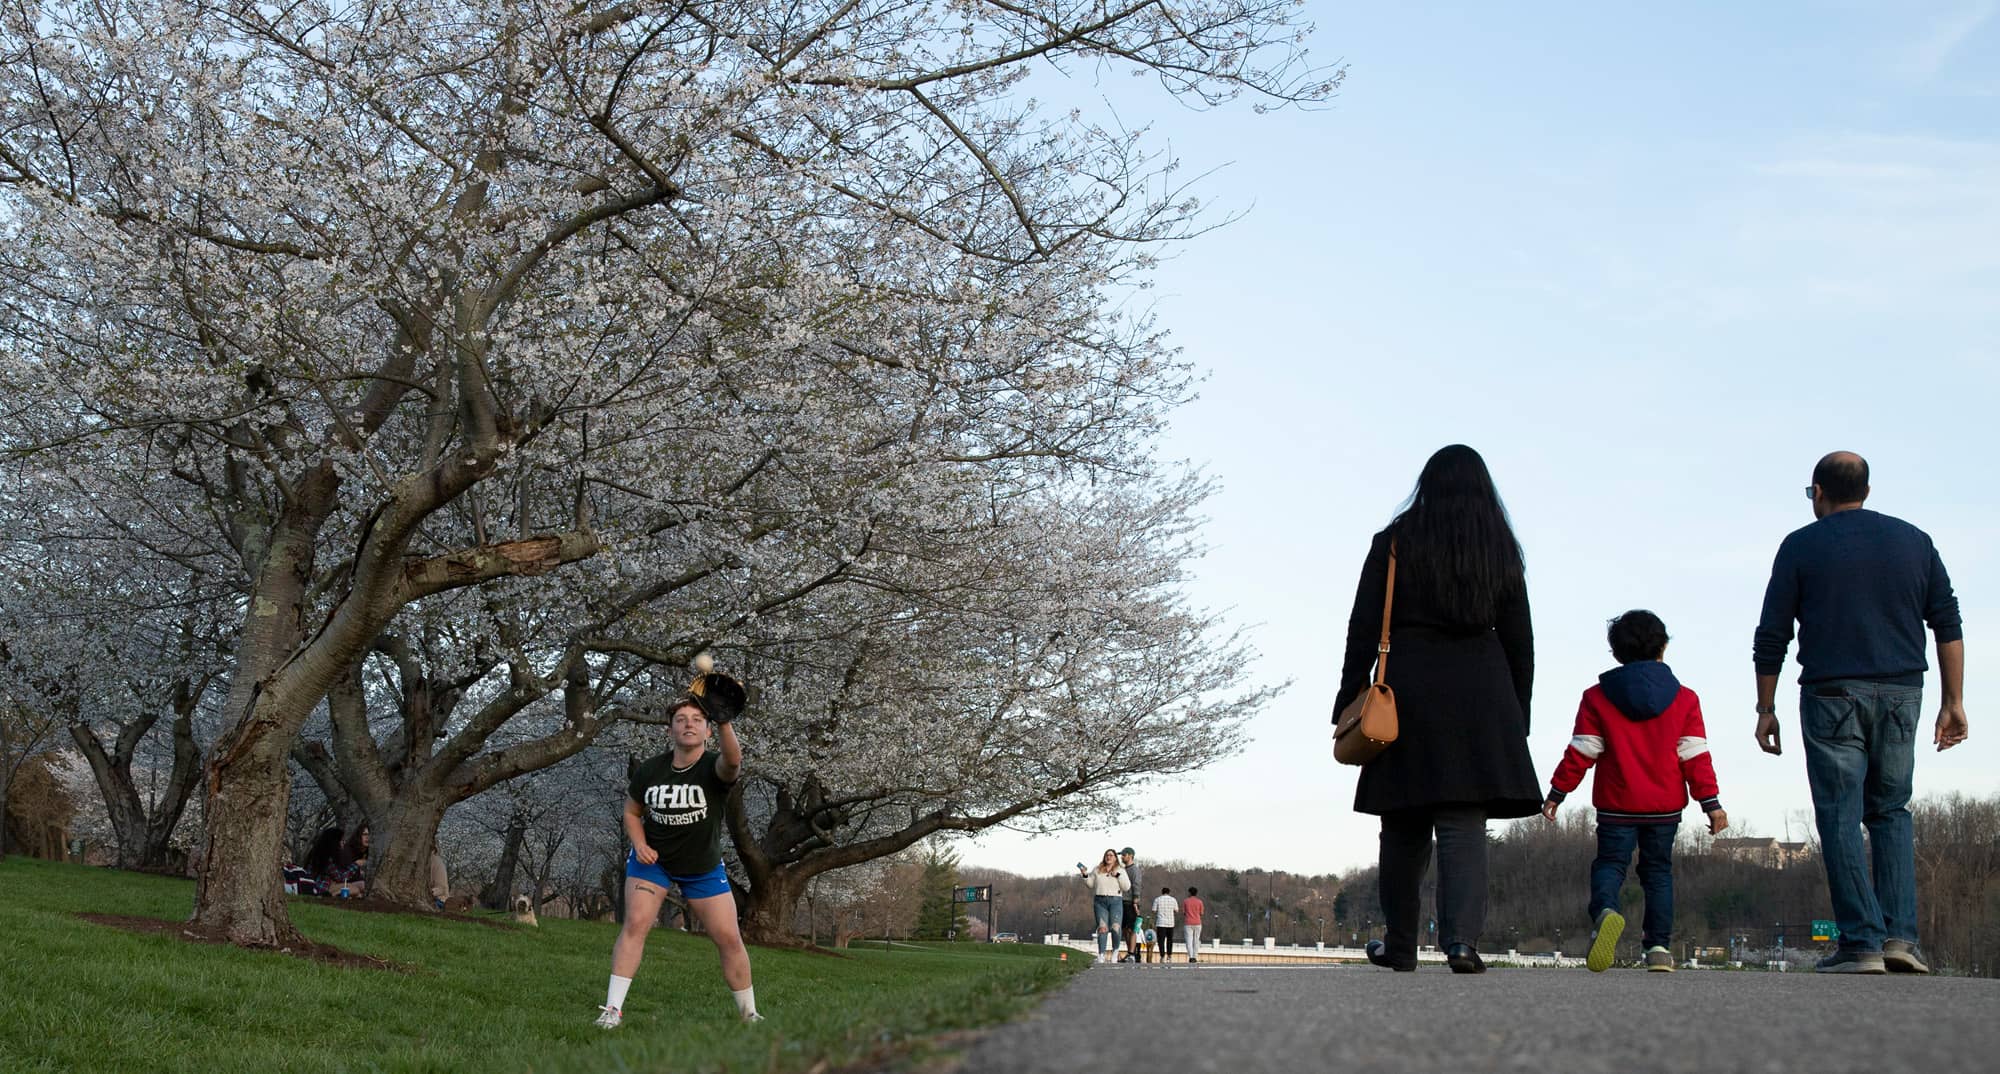 People enjoy the Cherry Blossom Trees on Sunday, April 10, 2022, in Athens, Ohio.